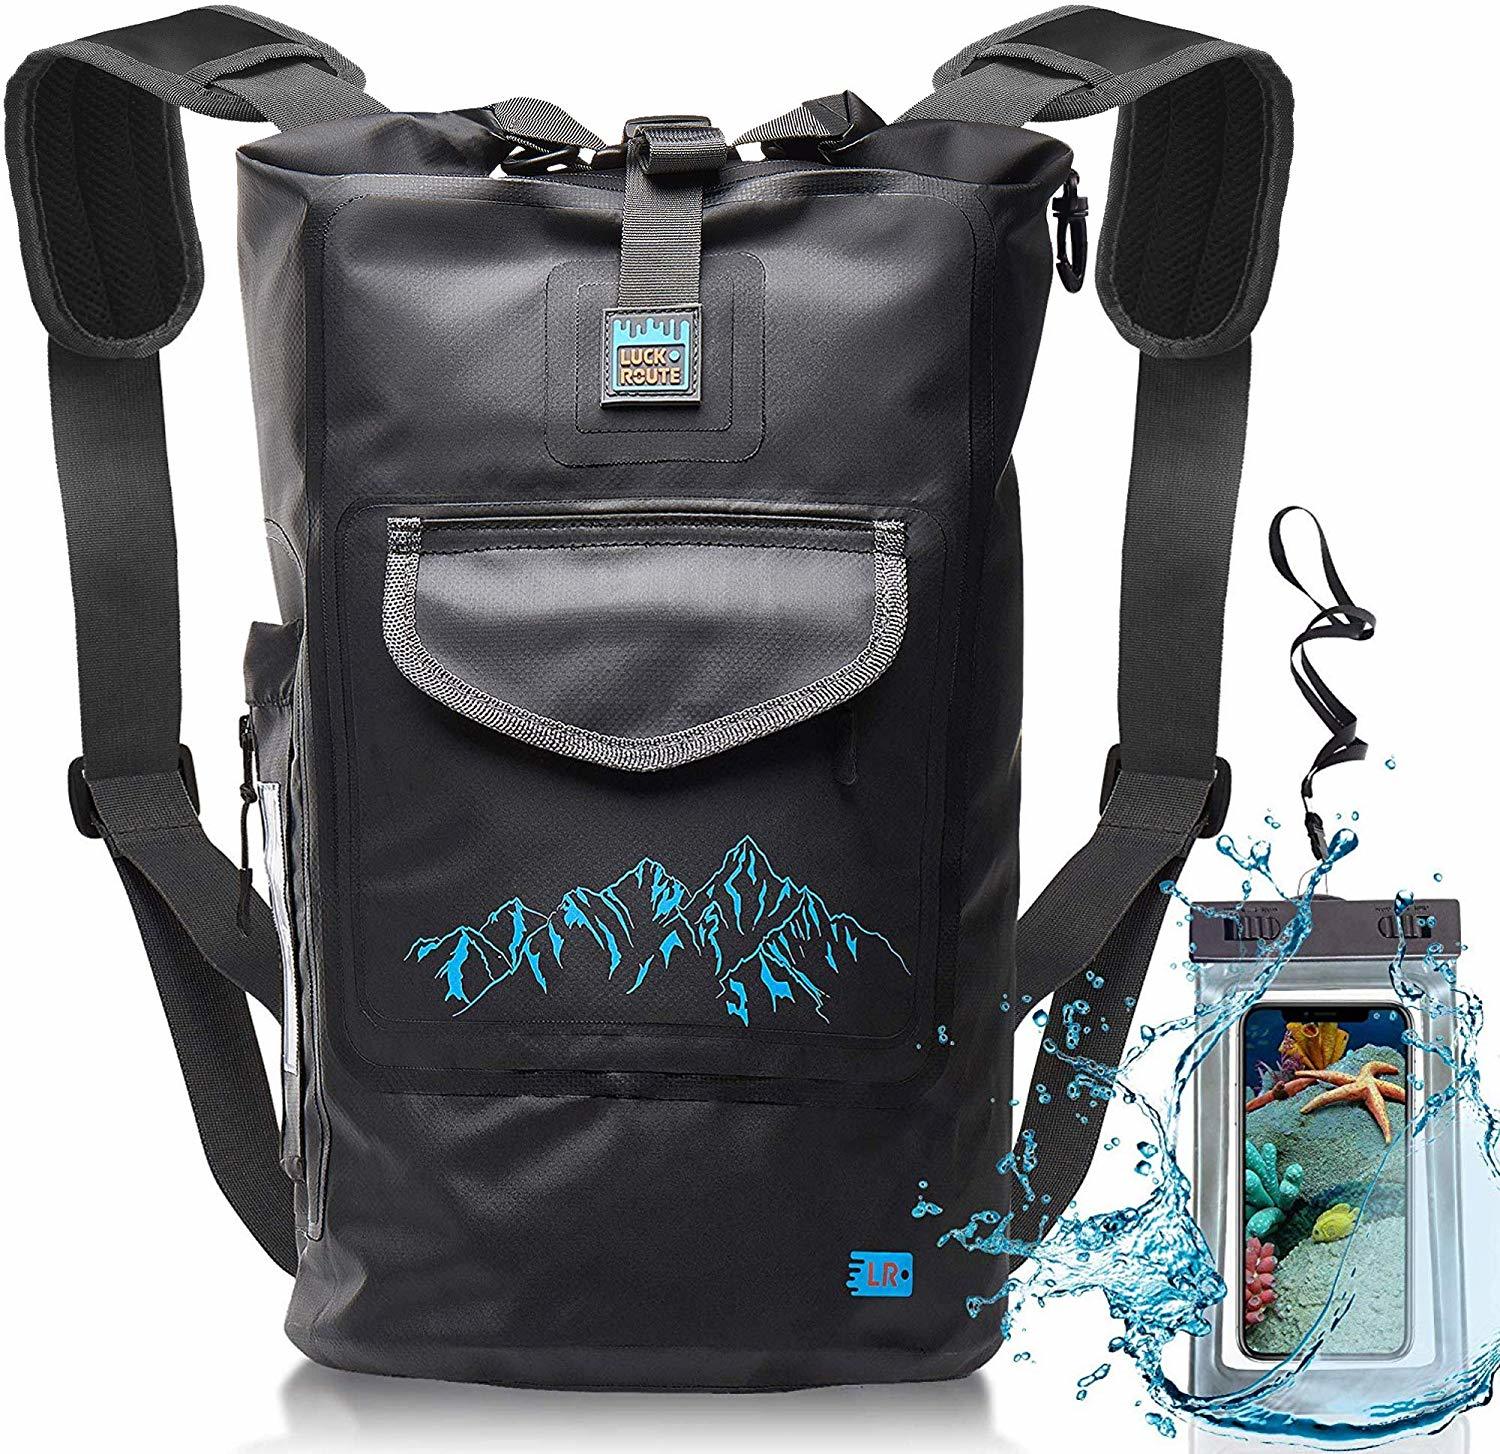 The Top 10 Dry Bag to Use to Keep Your Wet Clothes while Traveling 2